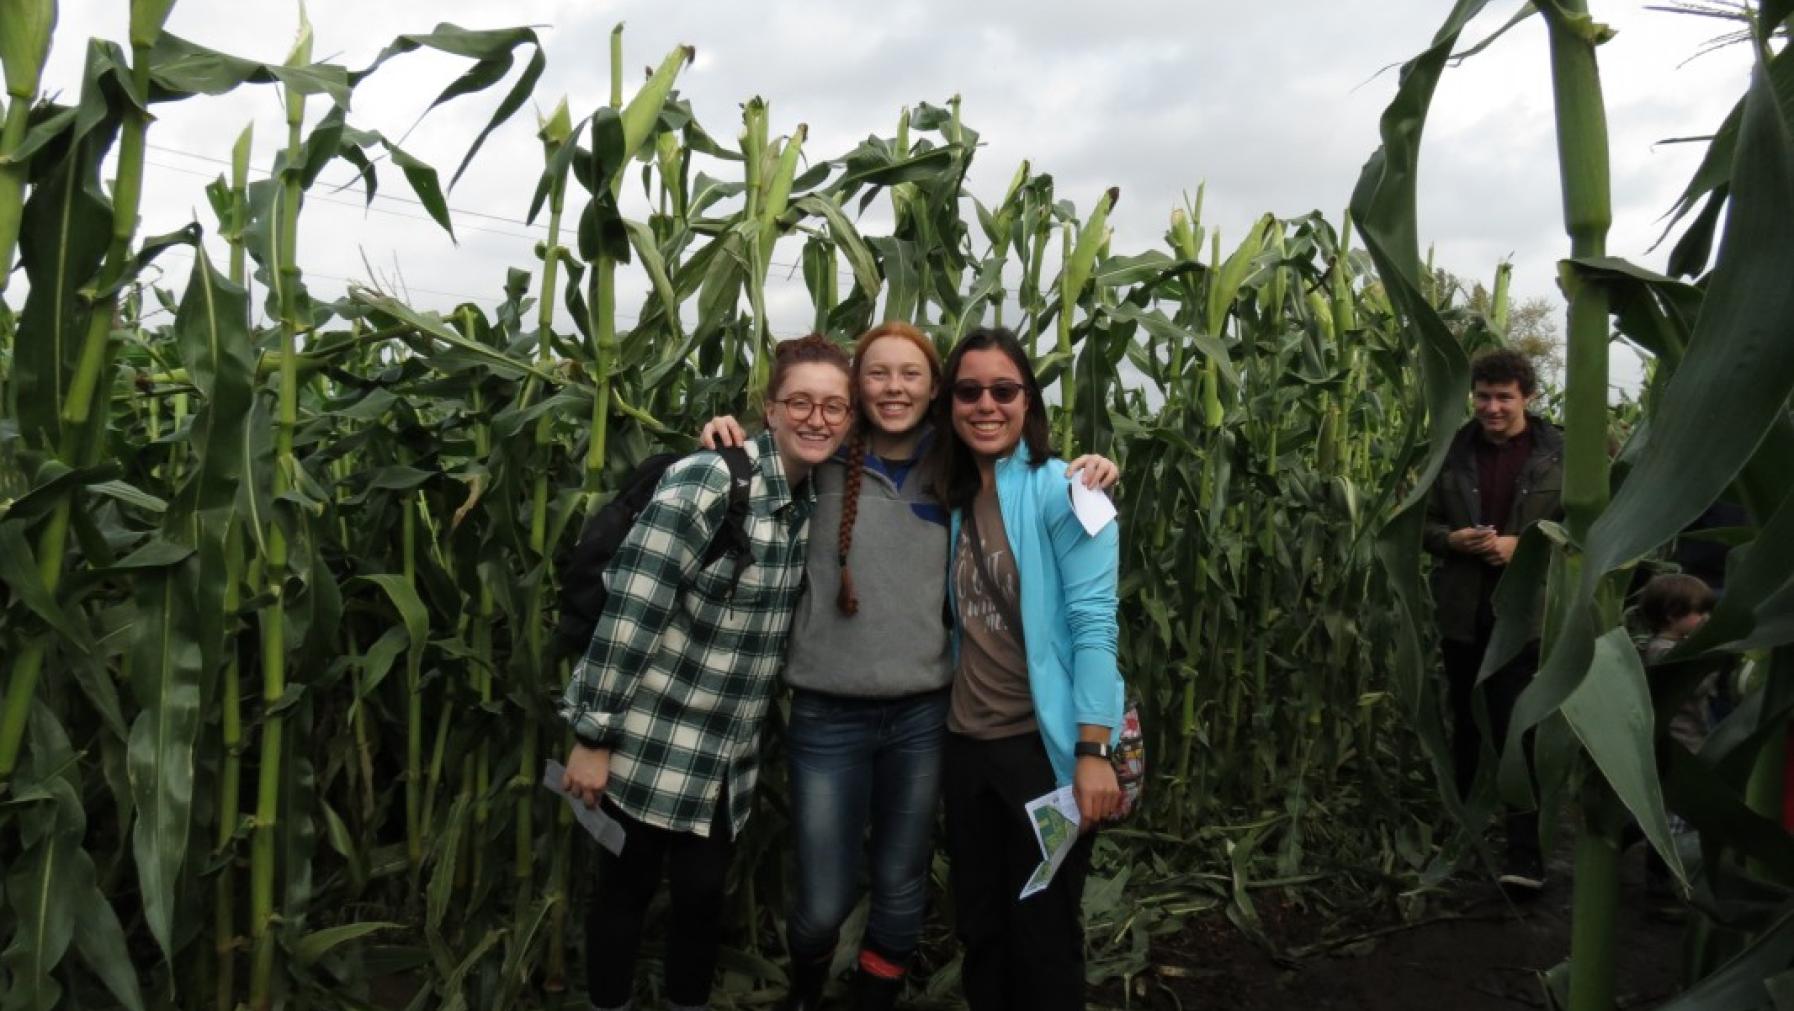 A group of people standing together in a cornfield.